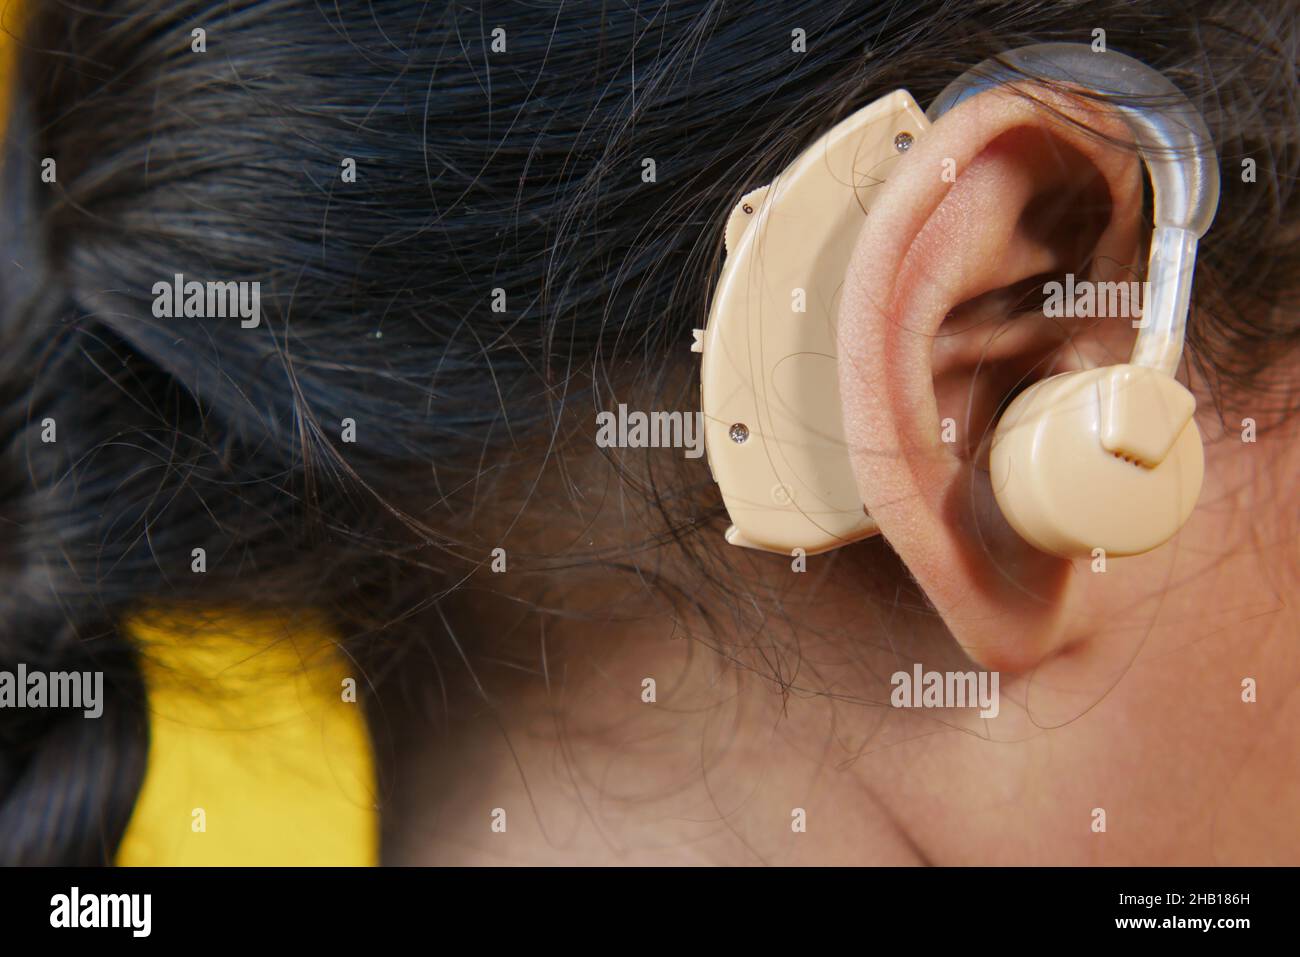 Hearing aid concept, a kid with hearing problems. Stock Photo